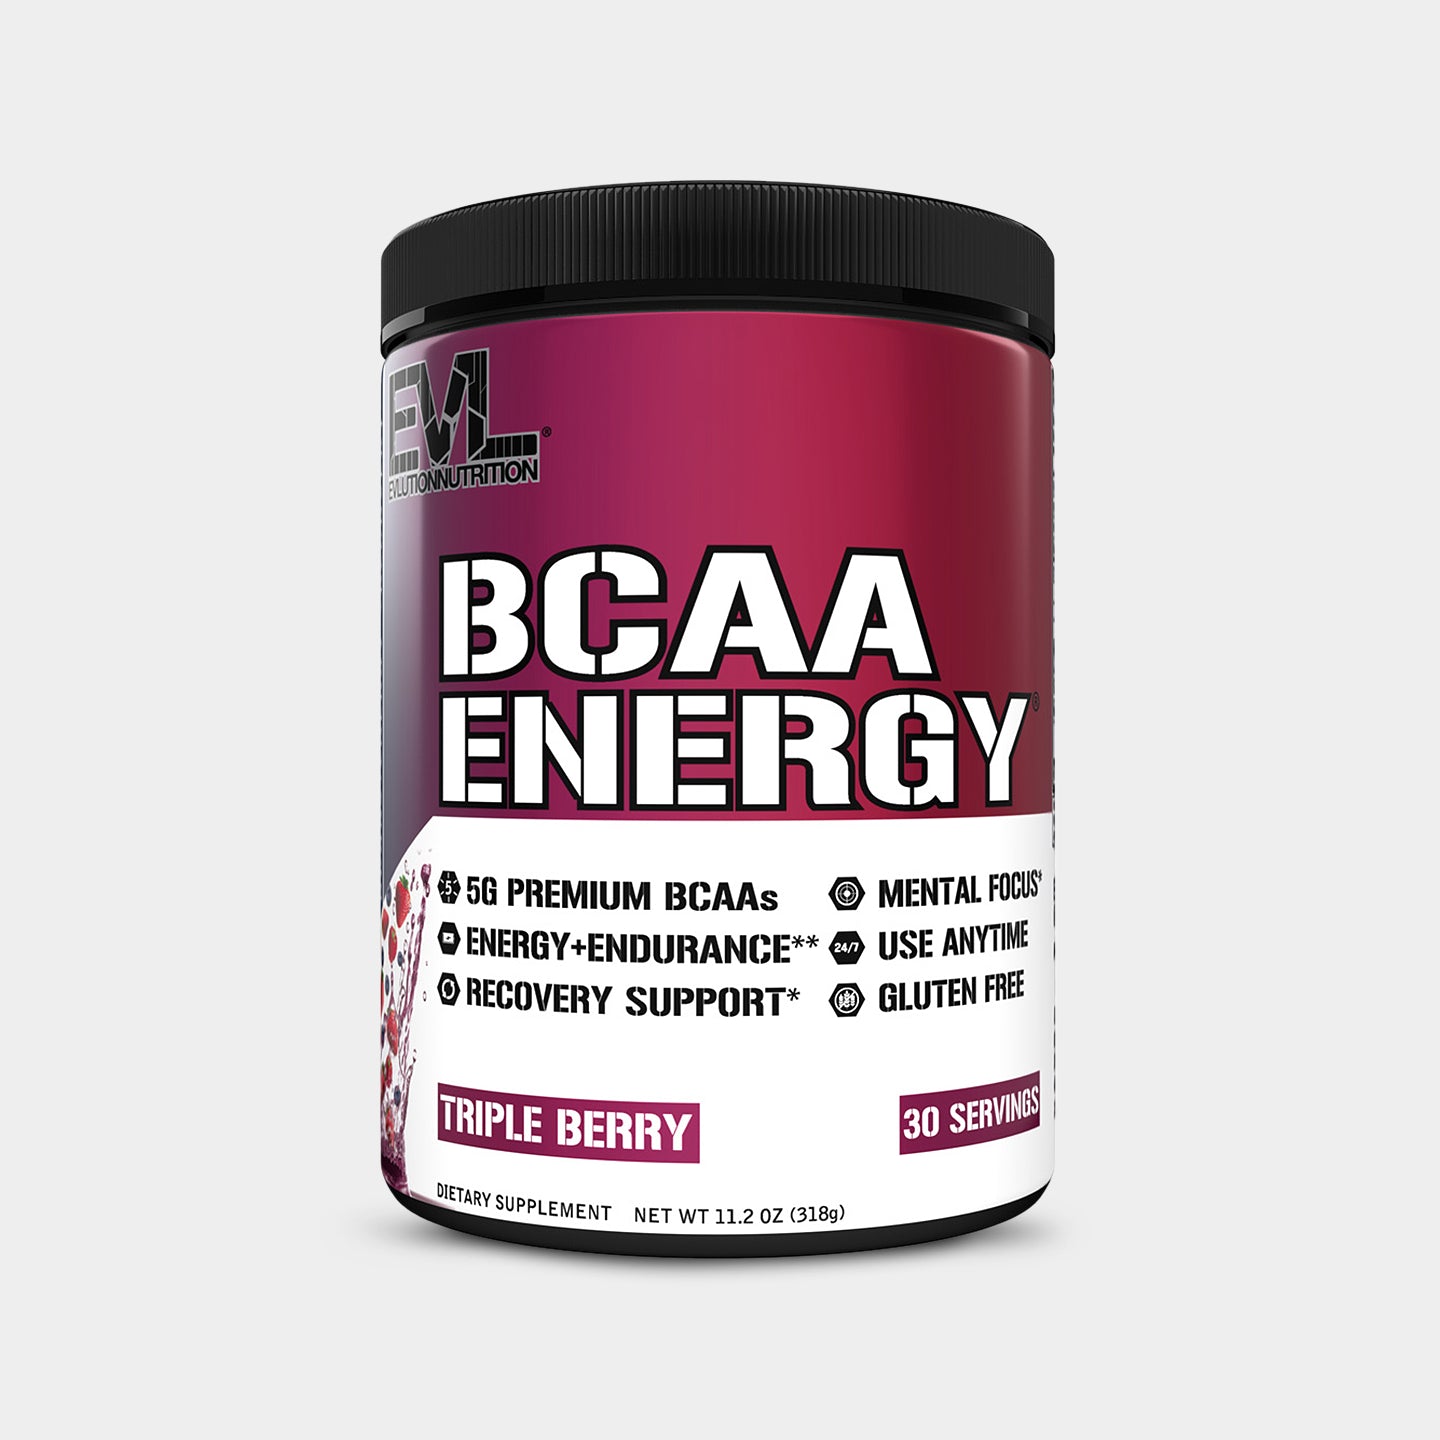 EVLUTION NUTRITION BCAA Energy Amino Acids, Triple Berry, 30 Servings